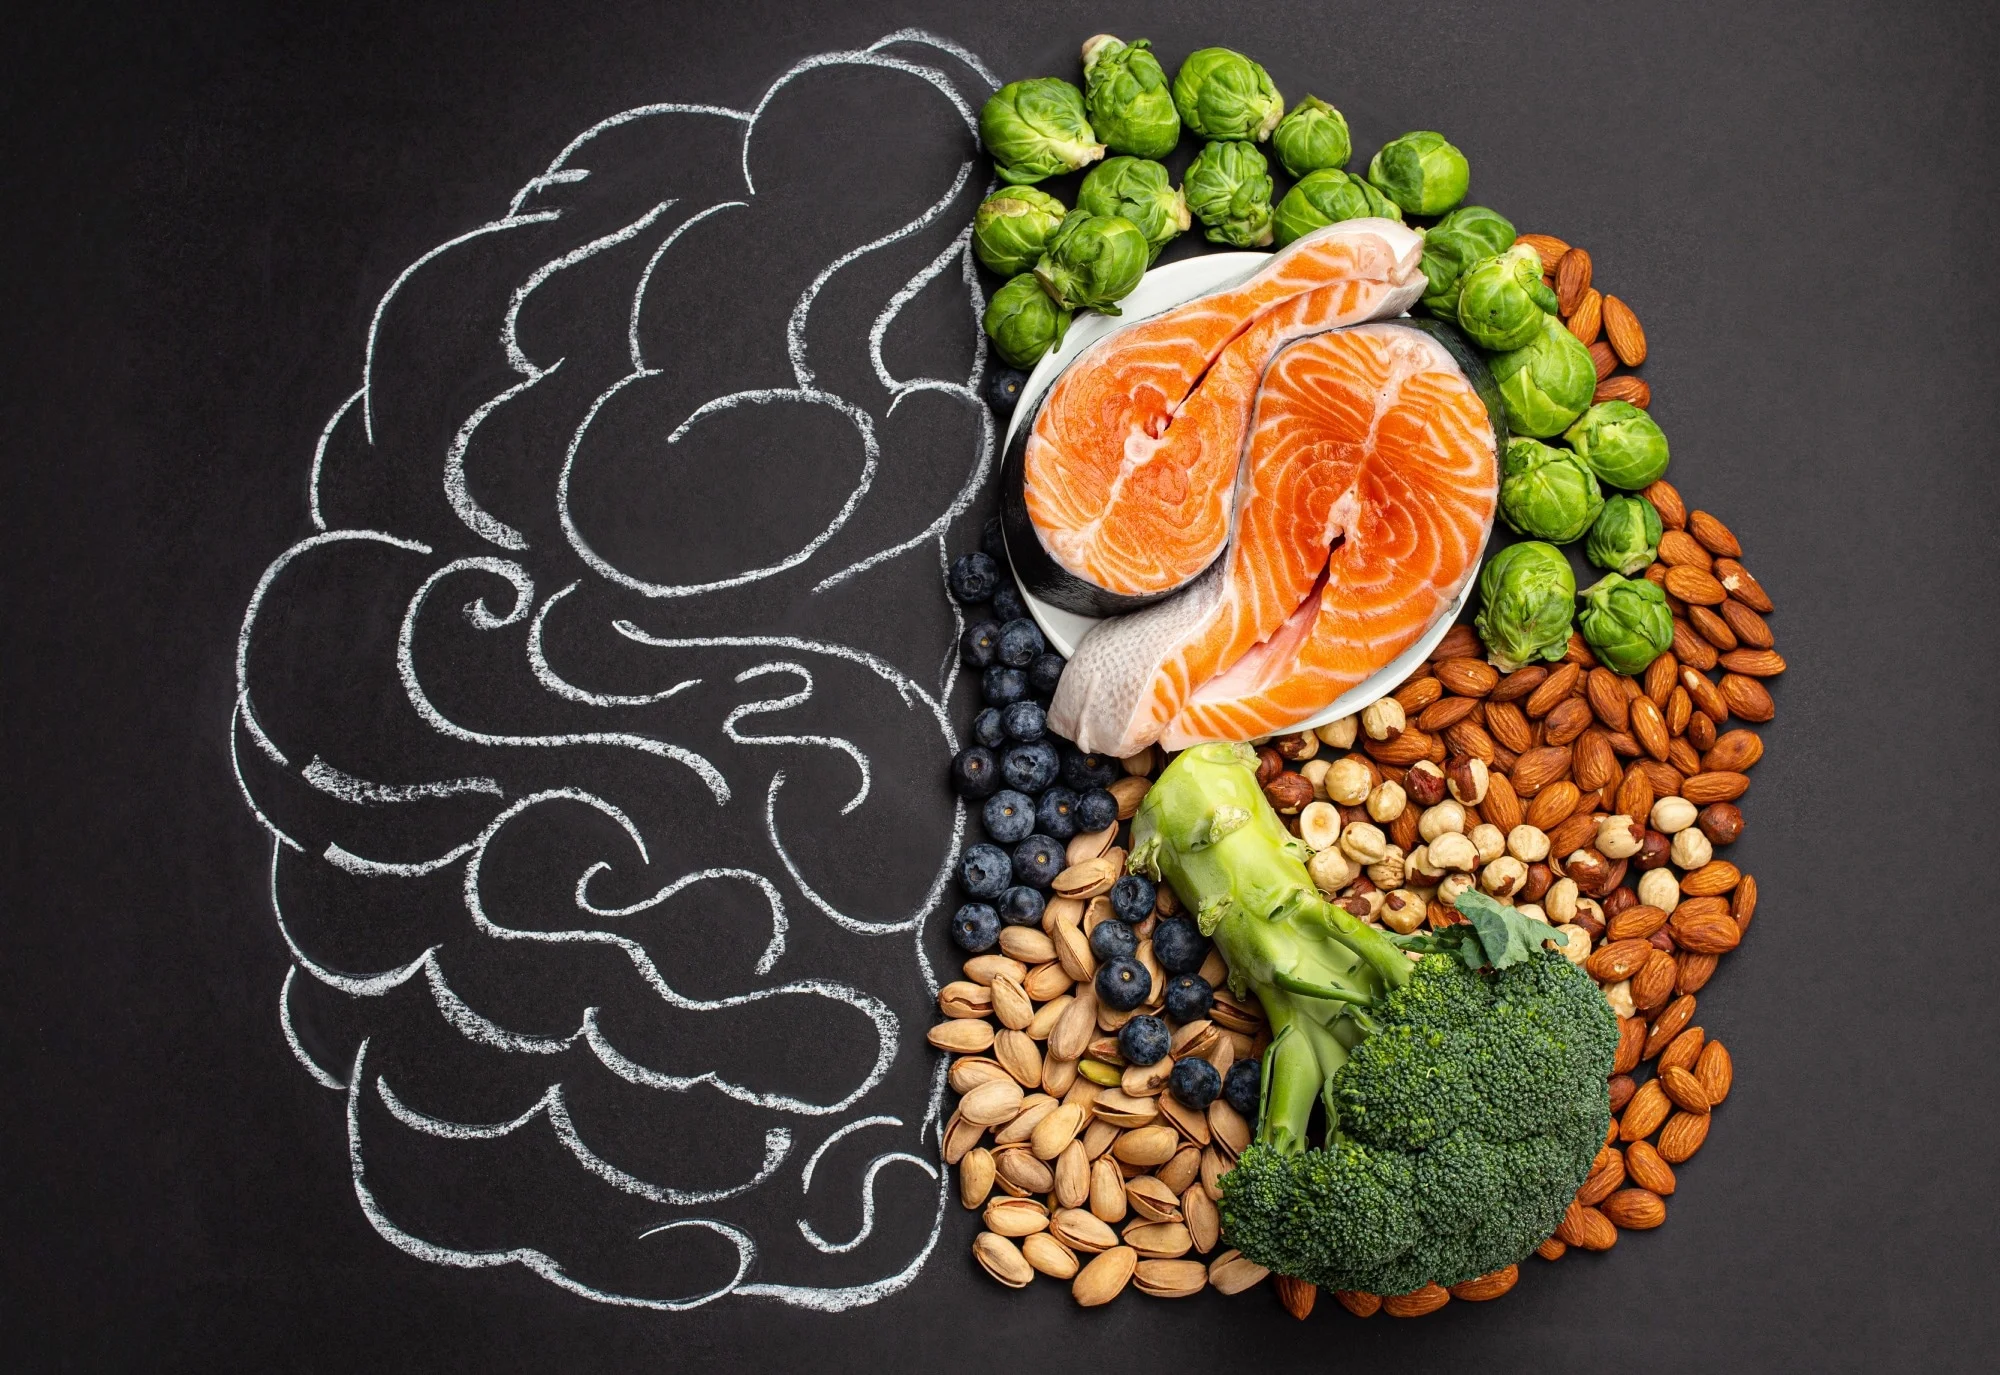 New Study Reveals Strong Correlation Between Diet and Brain Health